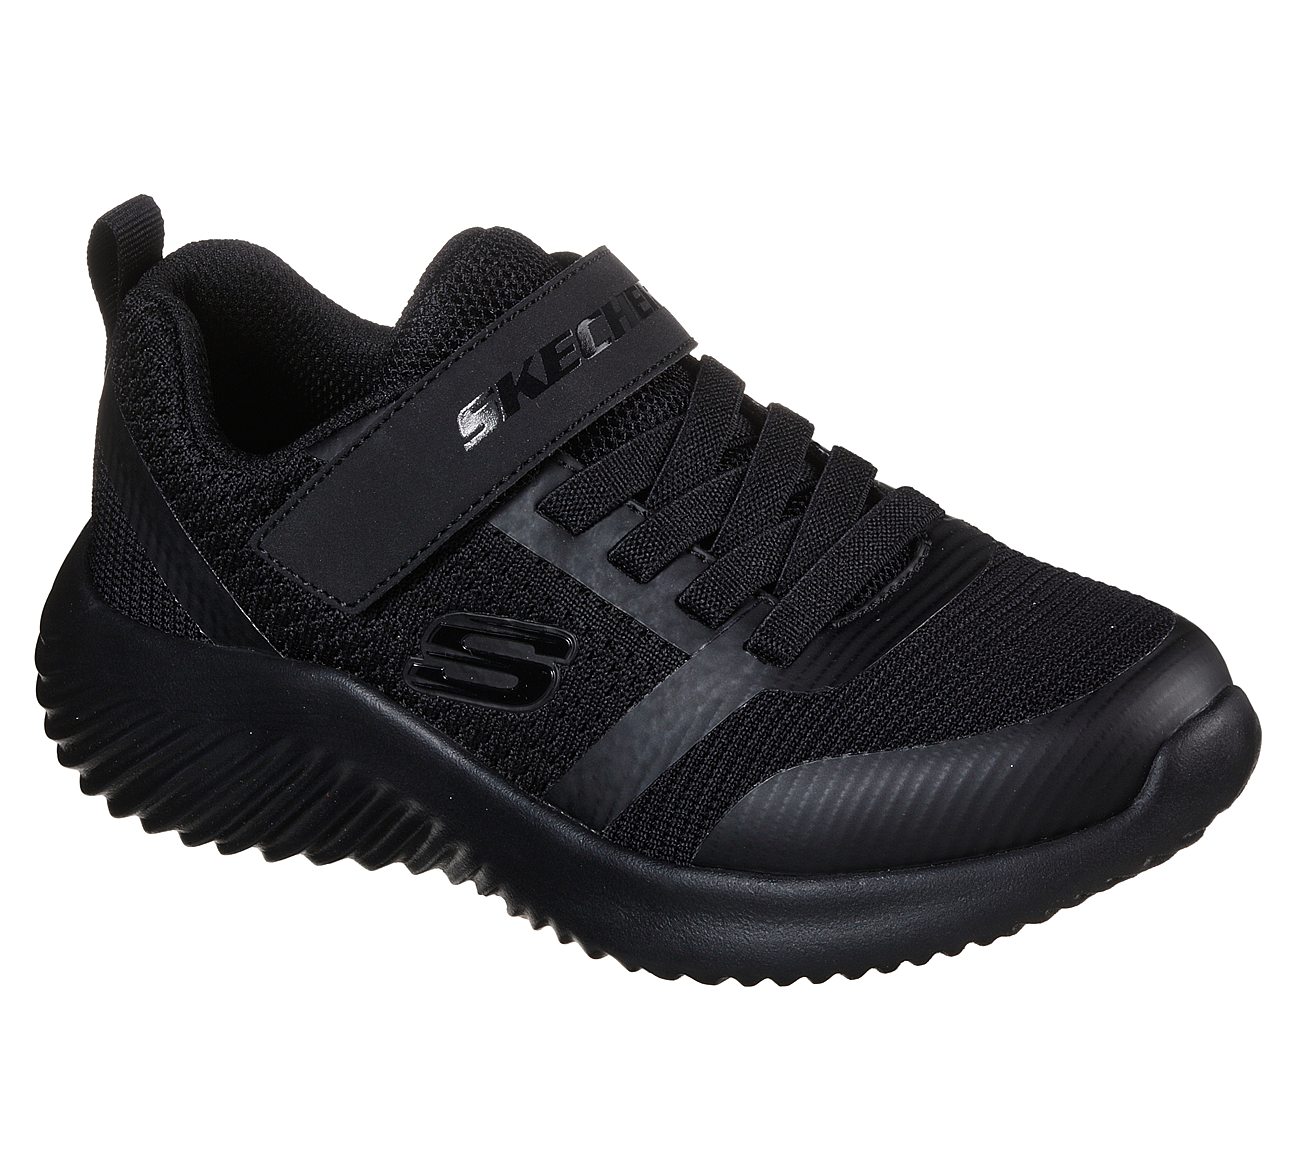 BOUNDER - ZALLOW, BBLACK Footwear Lateral View